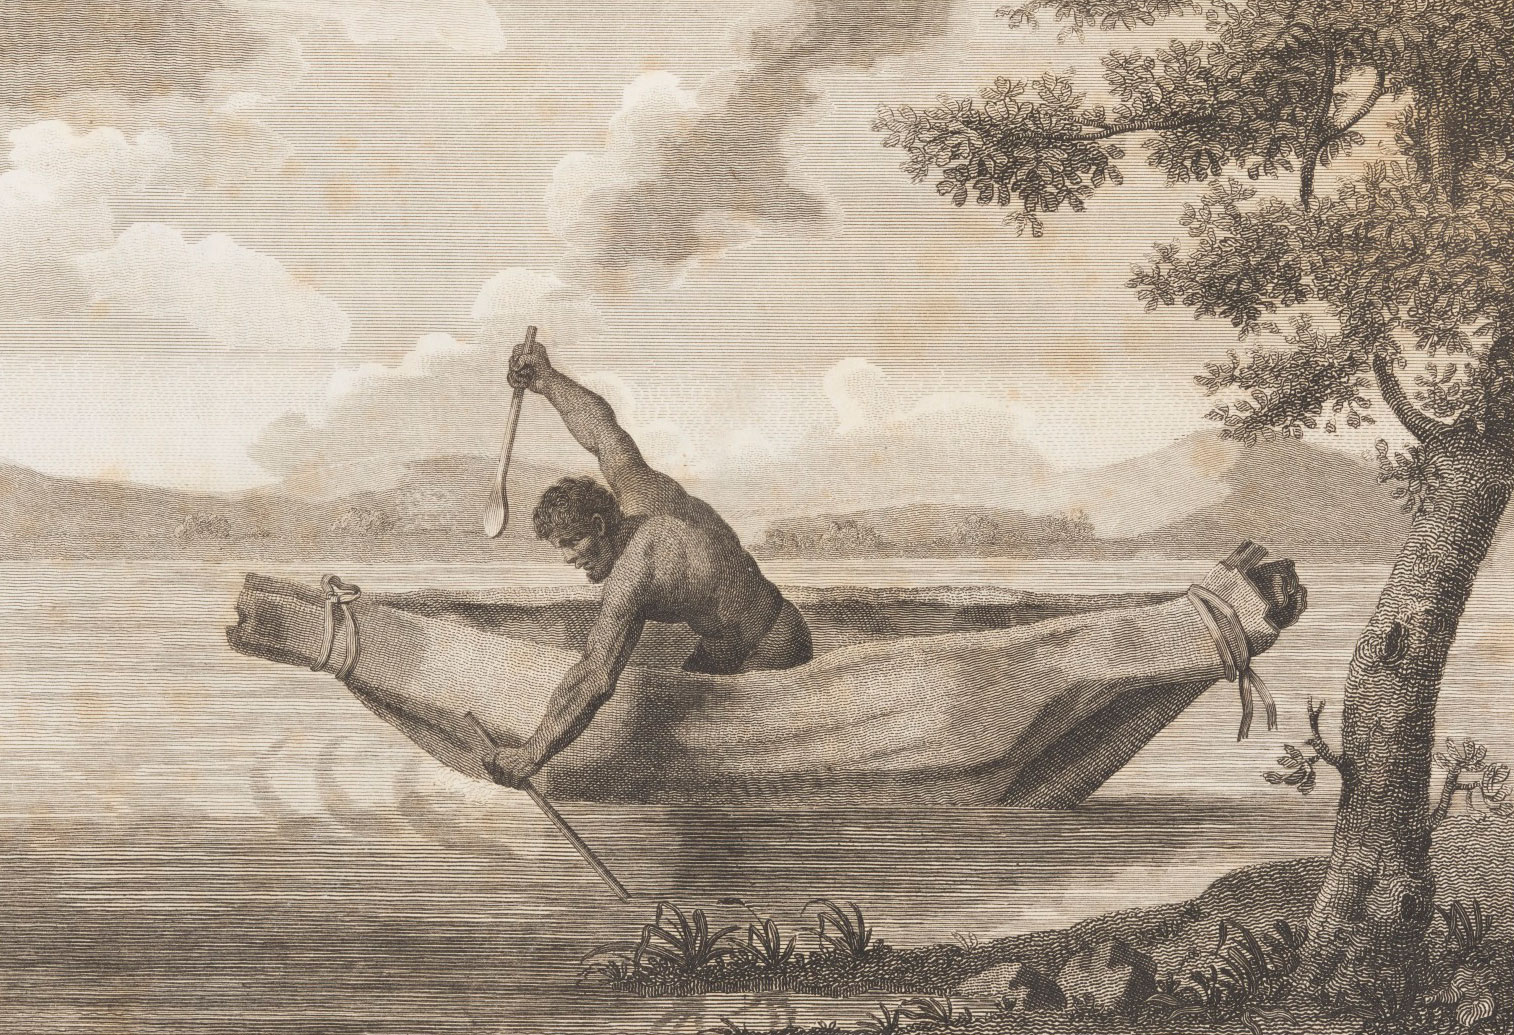 An engraving believed to be the only known depiction of Pemulwuy.